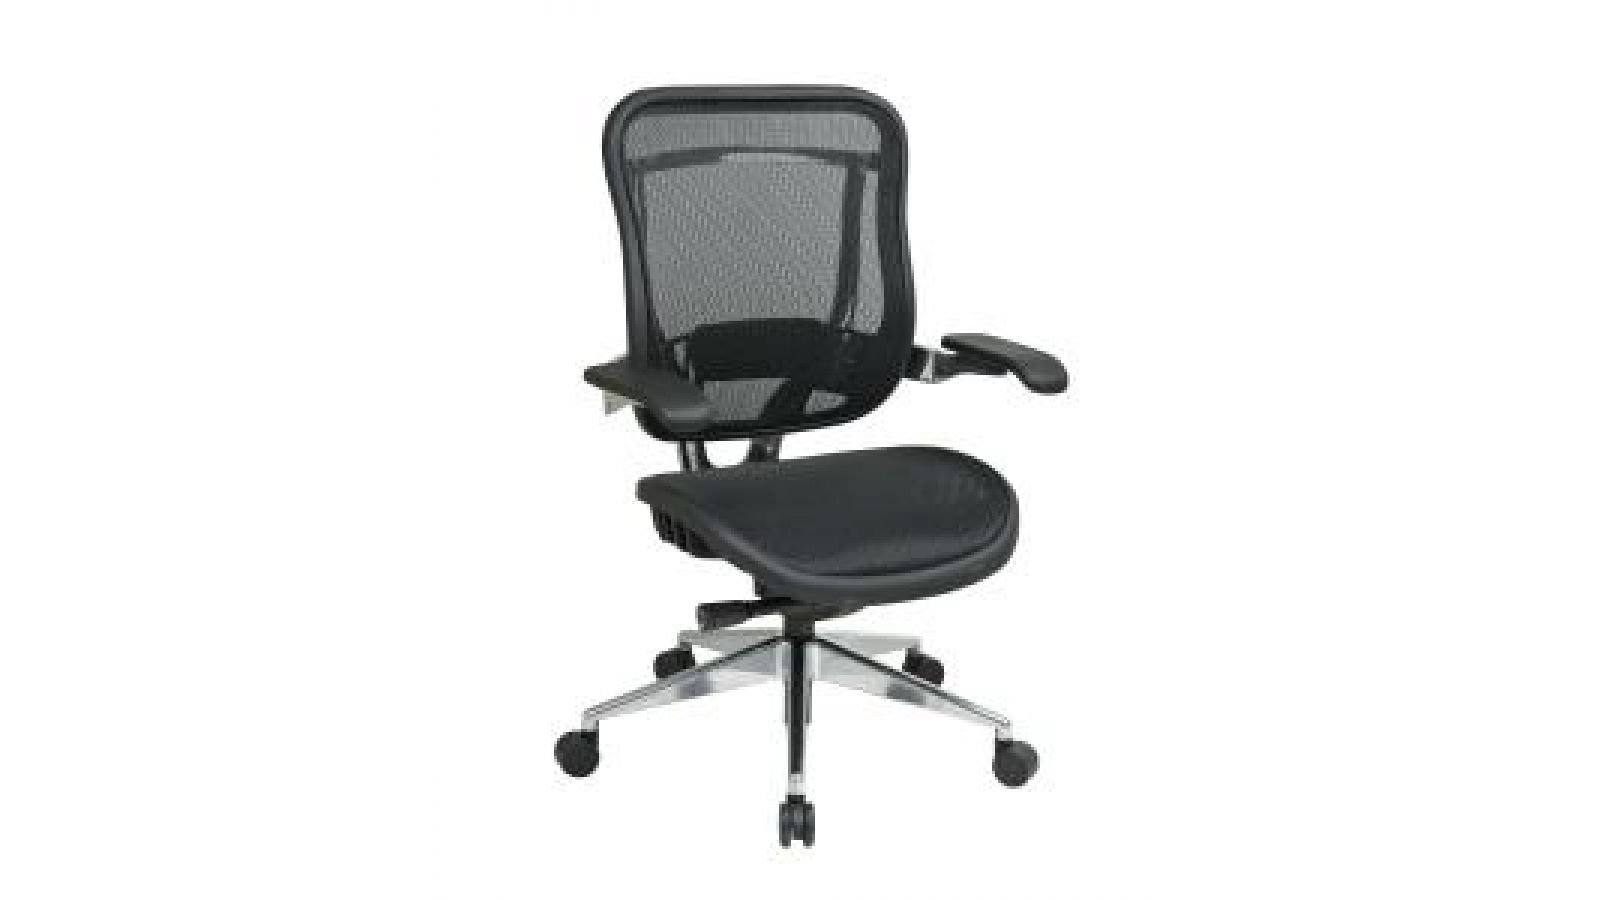 SPACE 818-Series Executive Chair for Contract Mark